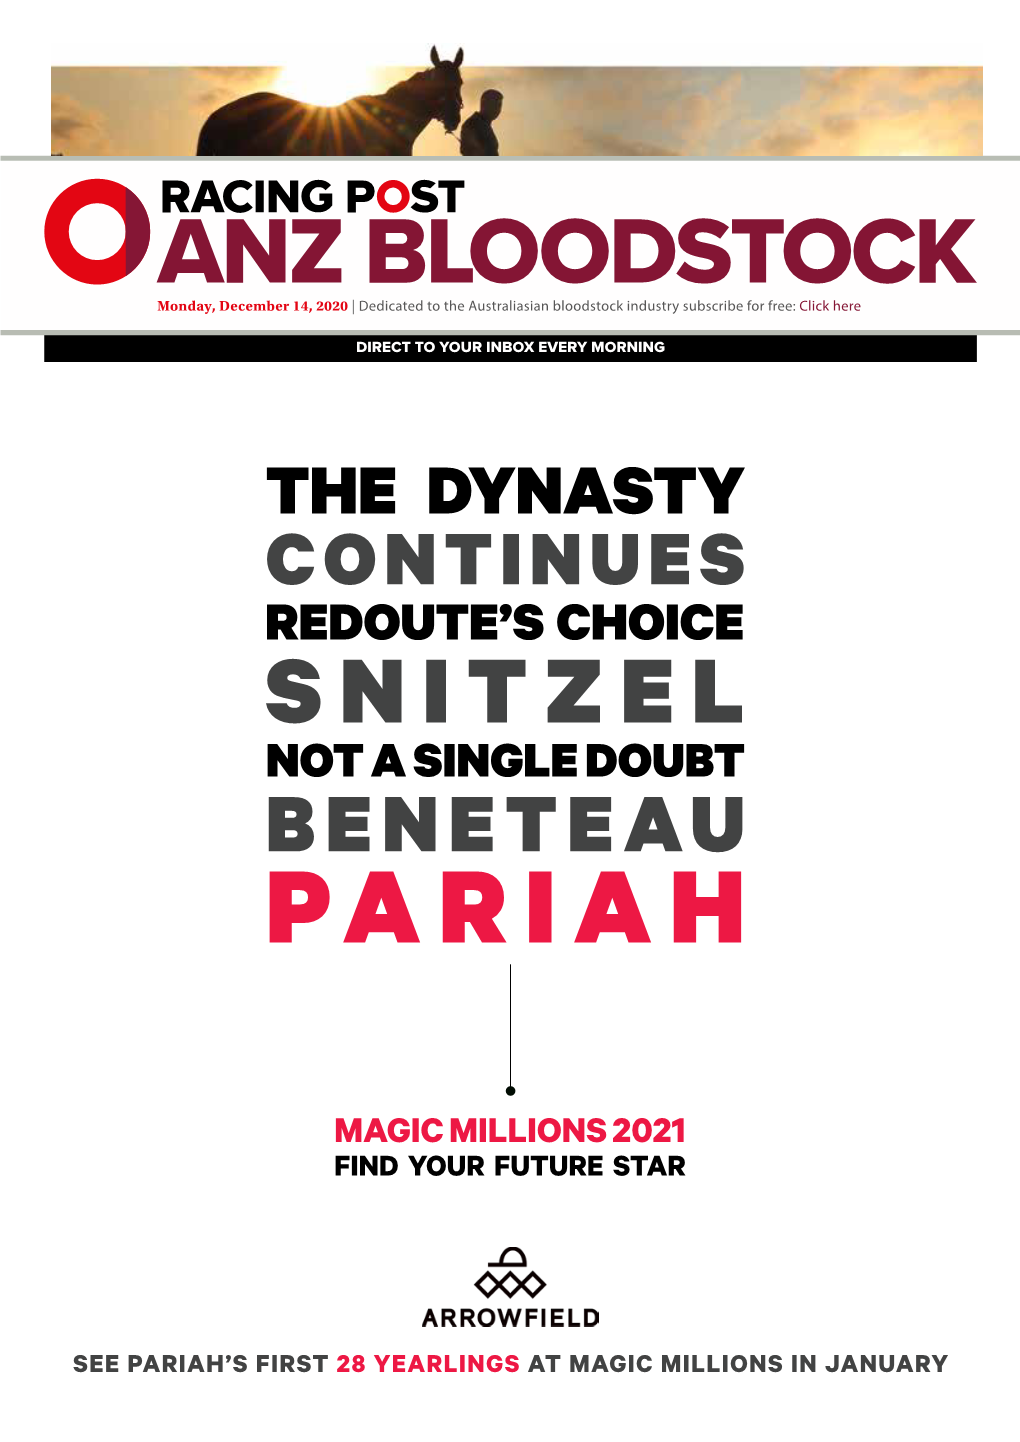 See Pariah's First 28 Yearlings at Magic Millions in January